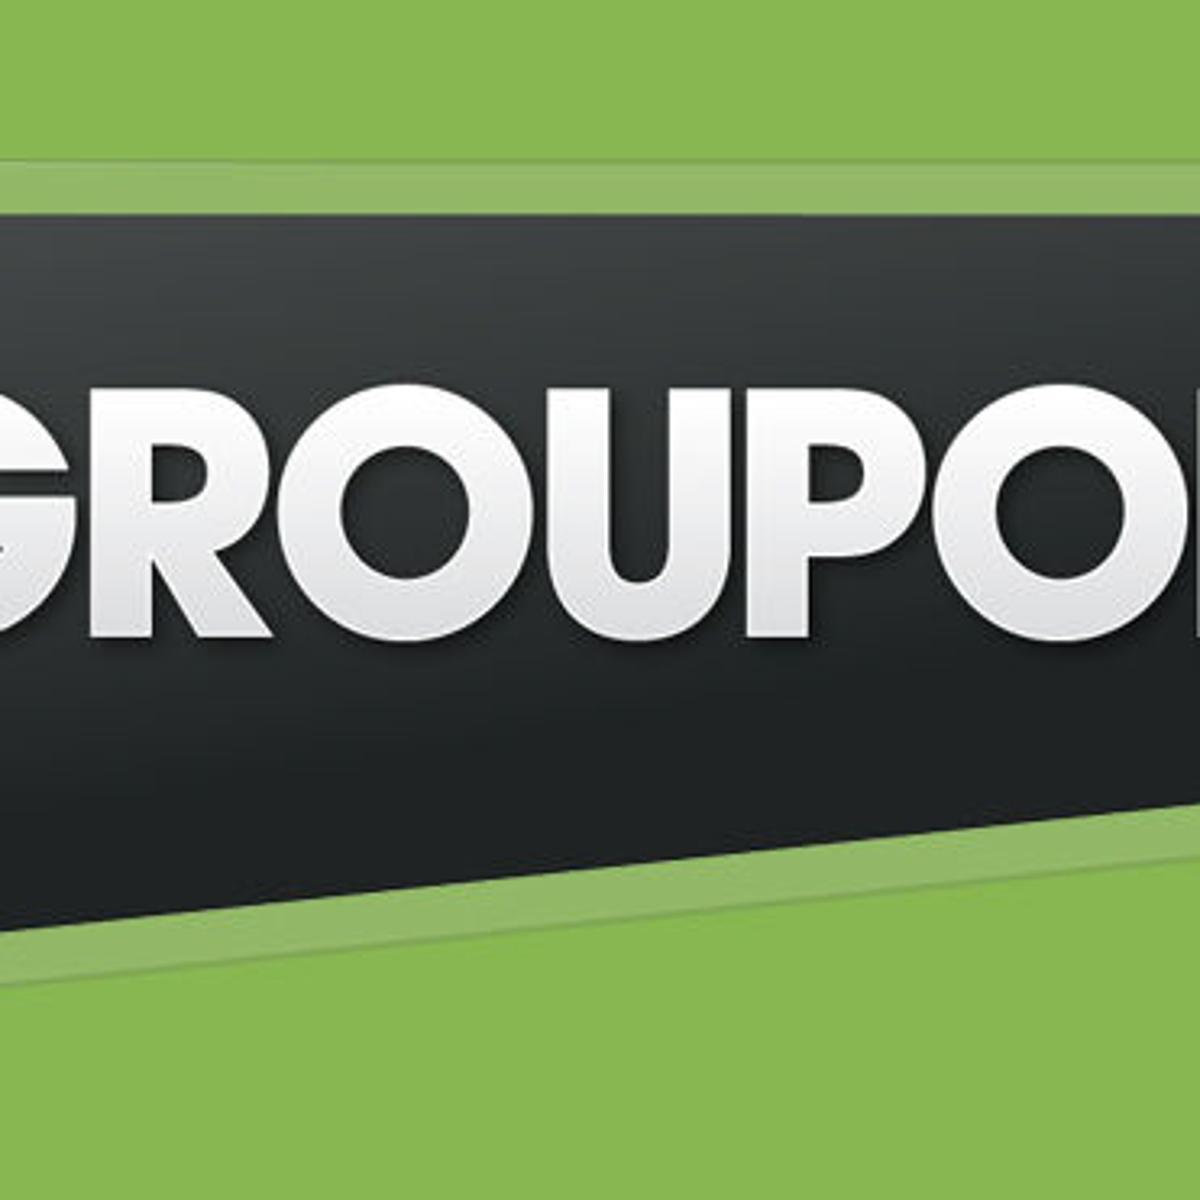 Groupon.com Logo - days only: Get an extra 20 percent off Groupon deals. Archive